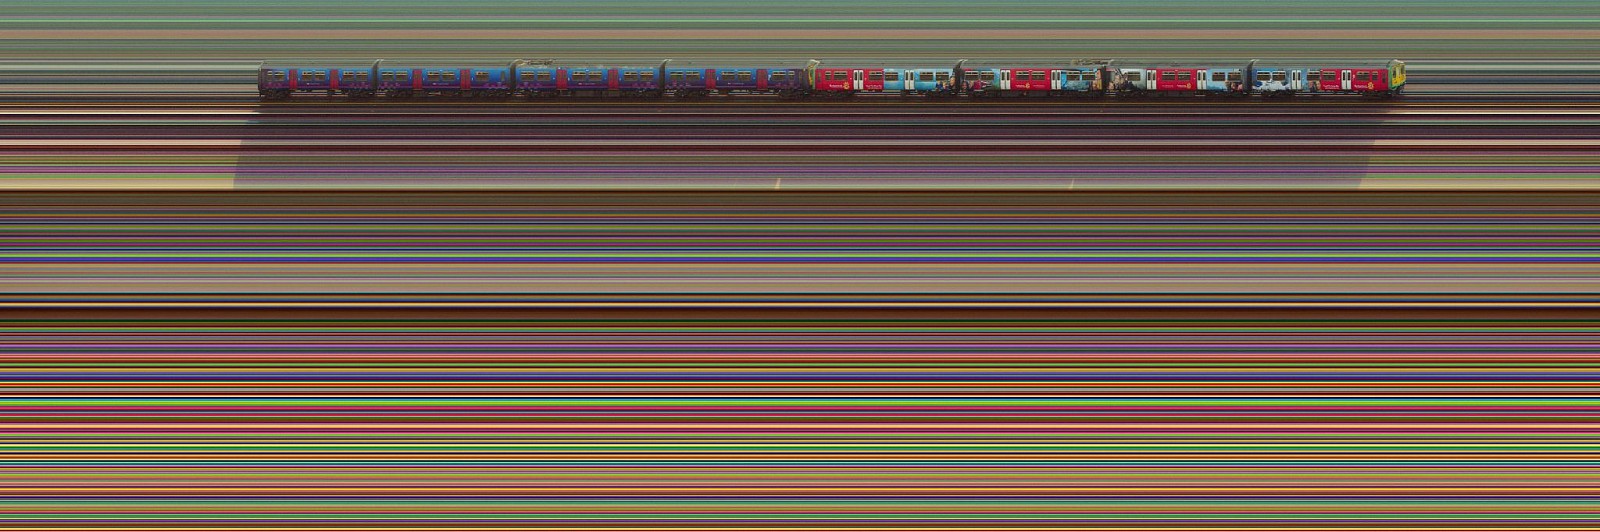 Jay Mark Johnson, BRIGHTON TRAINS #78, 2012 United Kingdom
archival pigment on paper, mounted on aluminum, 40 x 120 in. (101.6 x 304.8 cm)